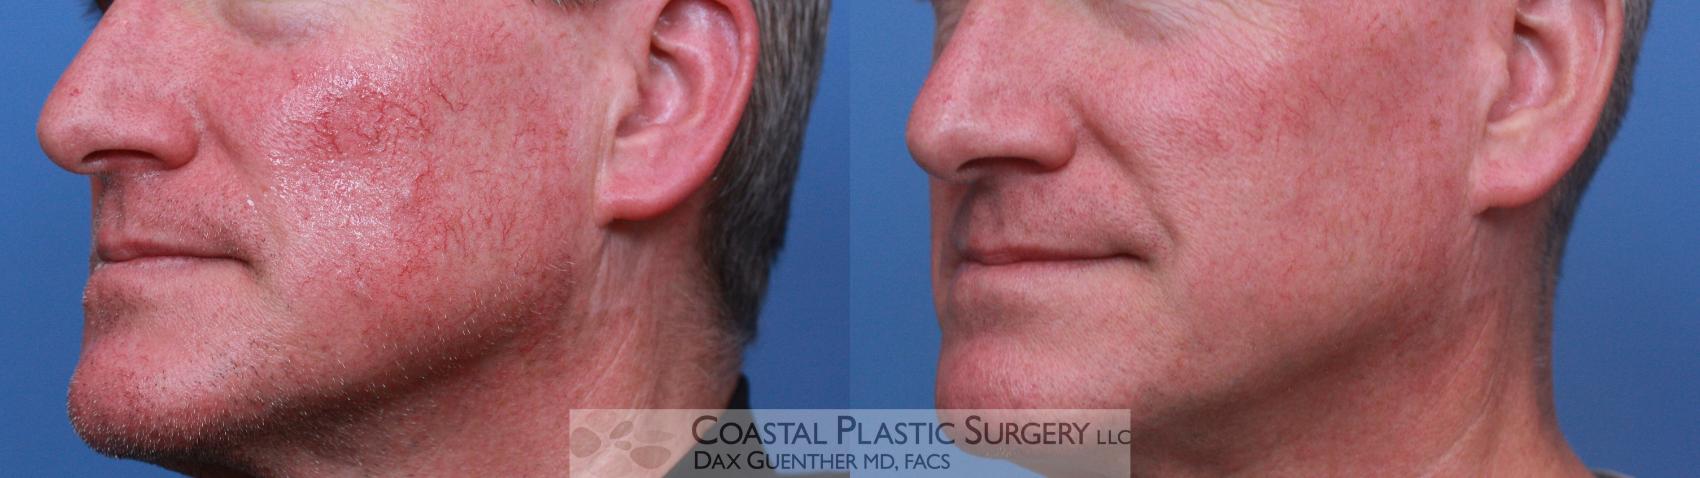 Before & After Chemical Peels & Lasers/Lights Case 119 Left Oblique View in Boston, MA